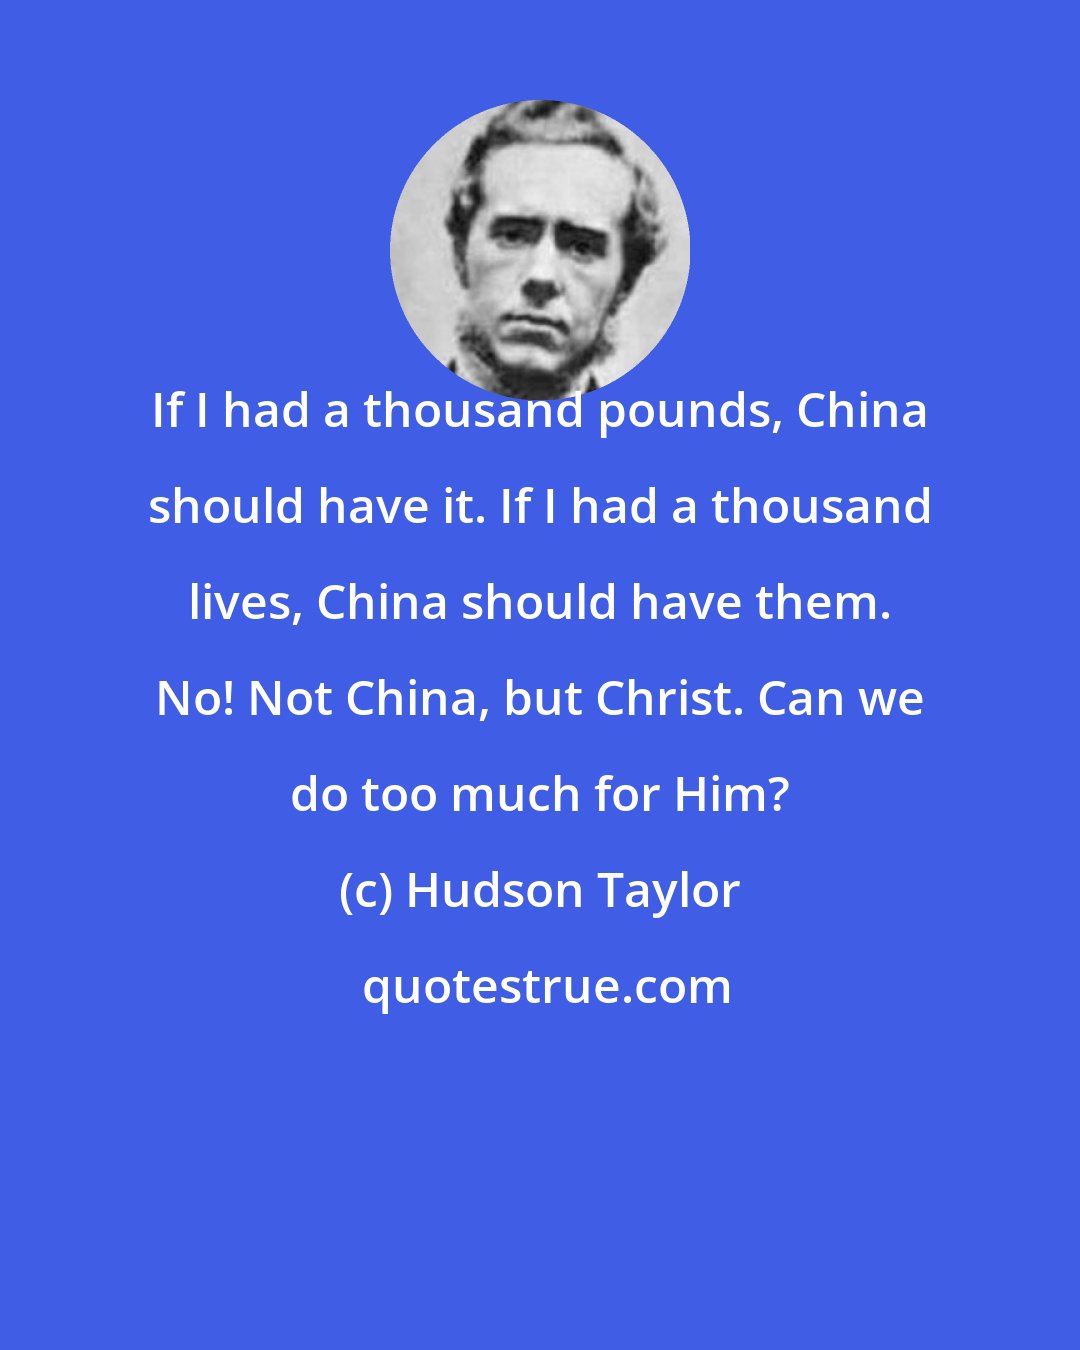 Hudson Taylor: If I had a thousand pounds, China should have it. If I had a thousand lives, China should have them. No! Not China, but Christ. Can we do too much for Him?